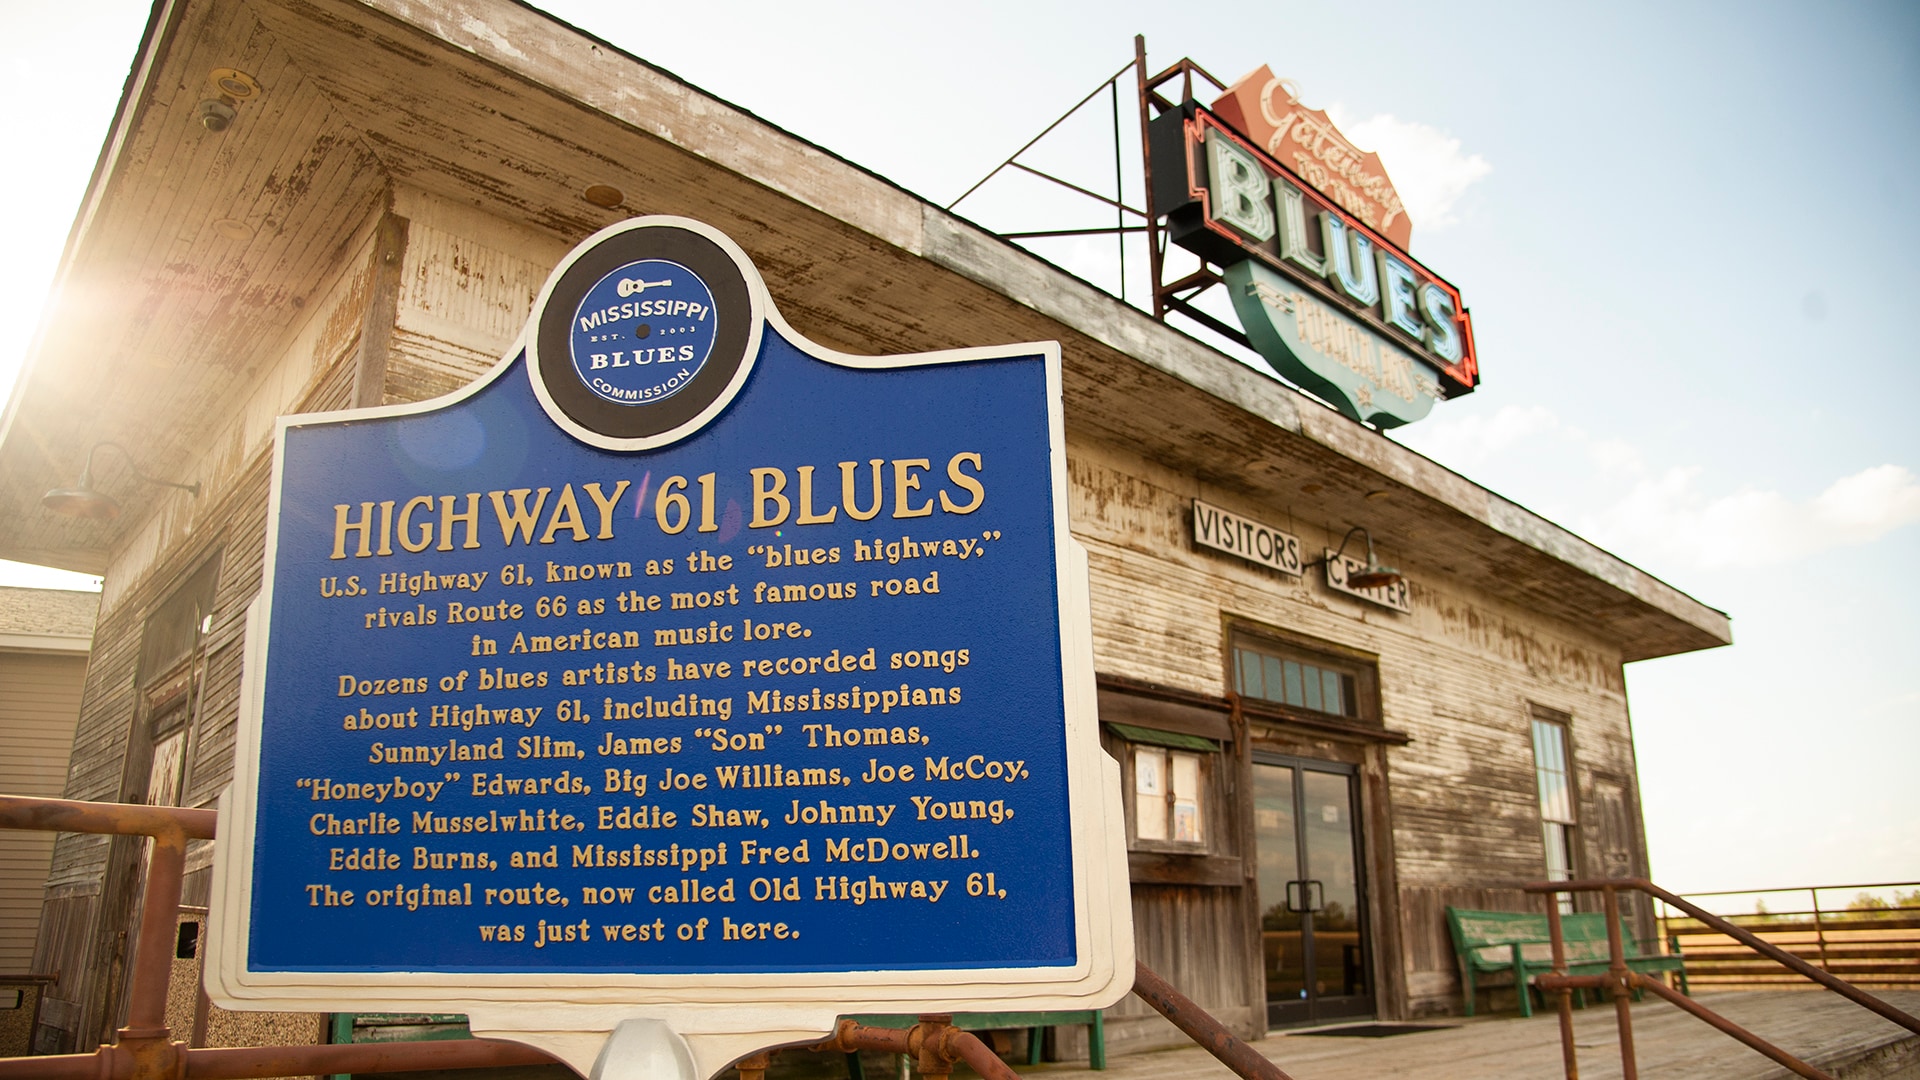 The Gateway to the Blues Museum in Tunica is often the first stop on a driving tour of Highway 61 and the Mississppi Blues Trail.